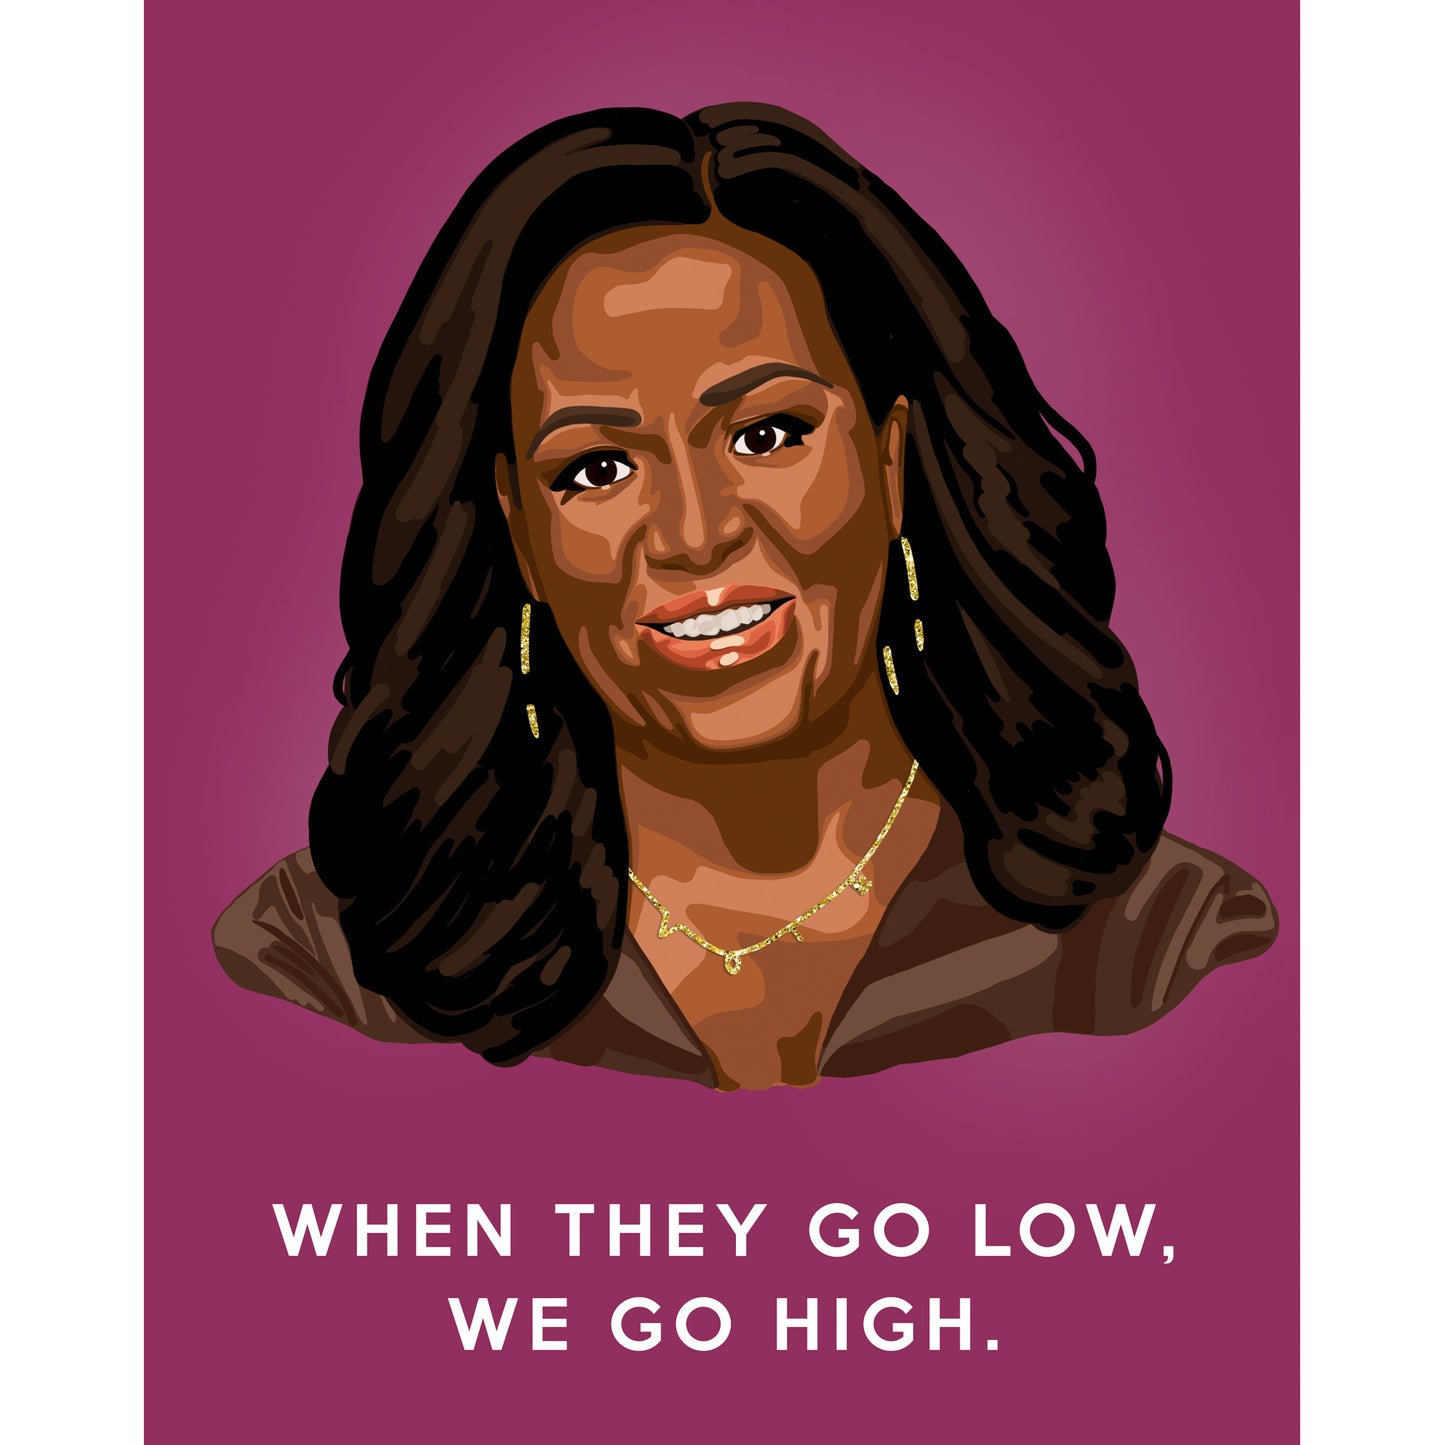 Michelle Obama 'When They Go Low' Art Print